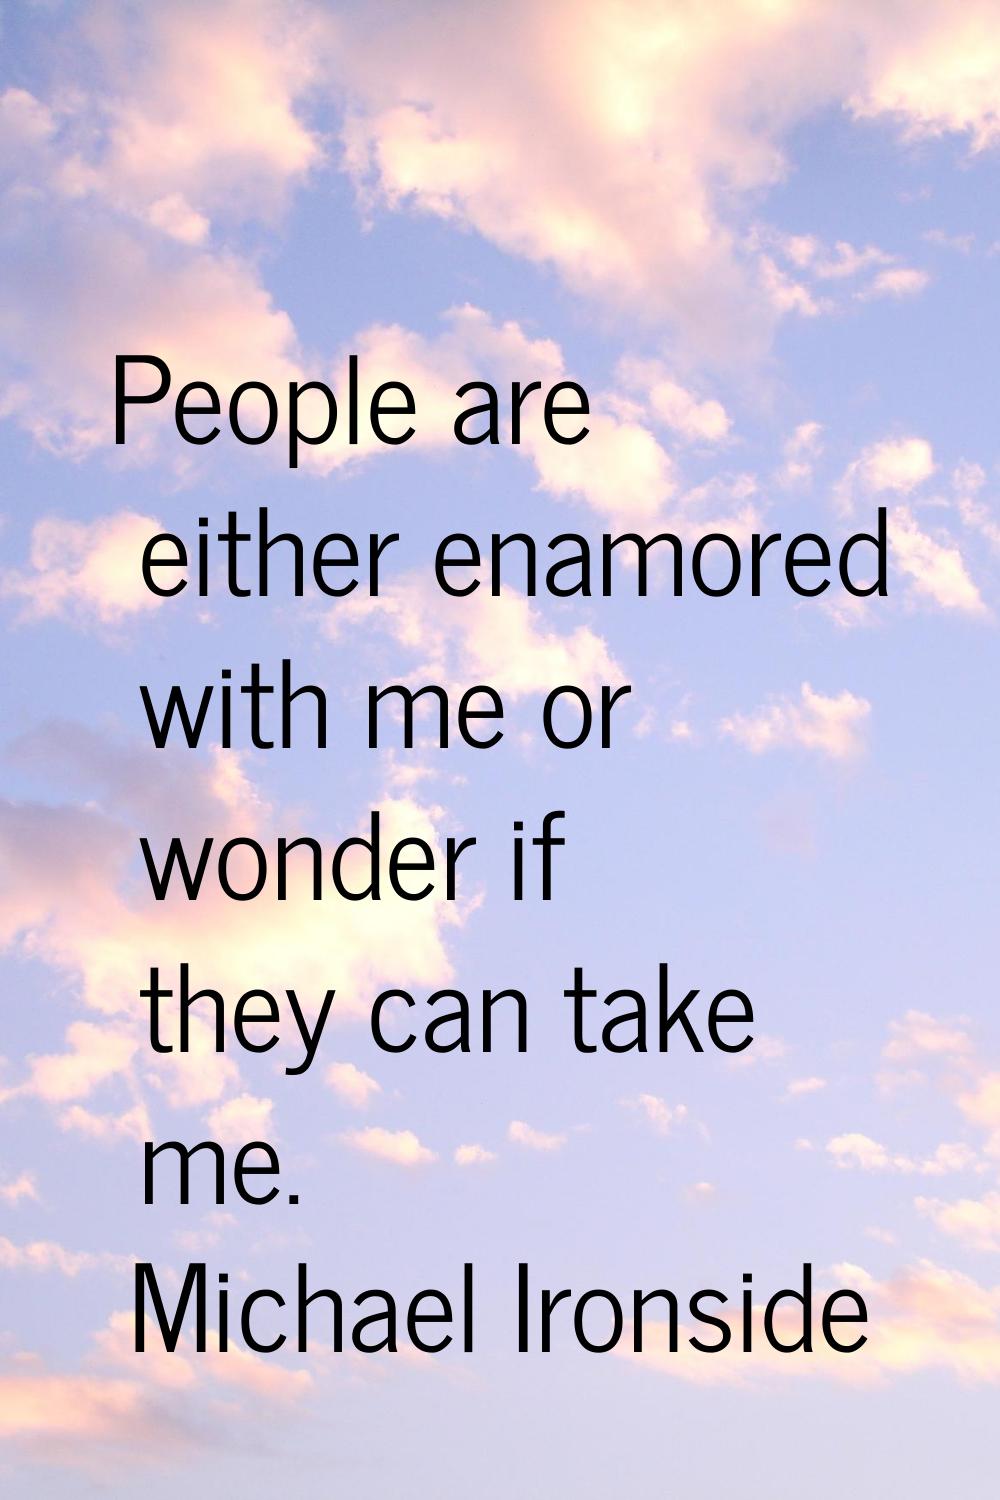 People are either enamored with me or wonder if they can take me.